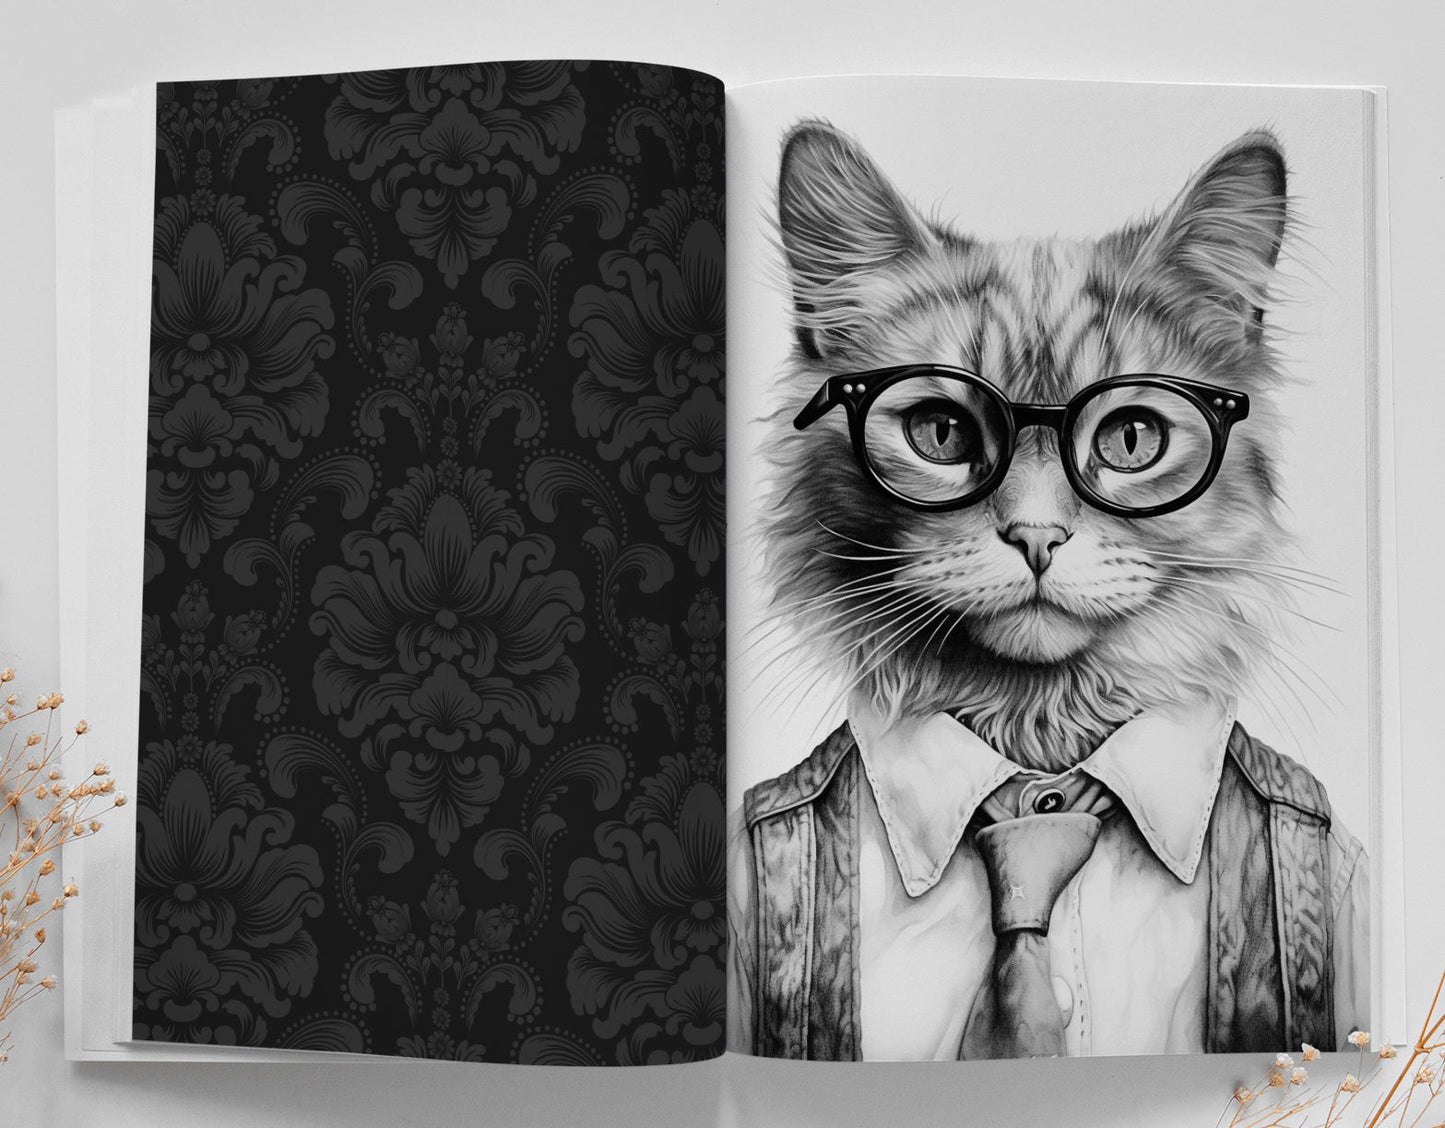 Cool Cats Coloring Book Grayscale (Printbook) - Monsoon Publishing USA